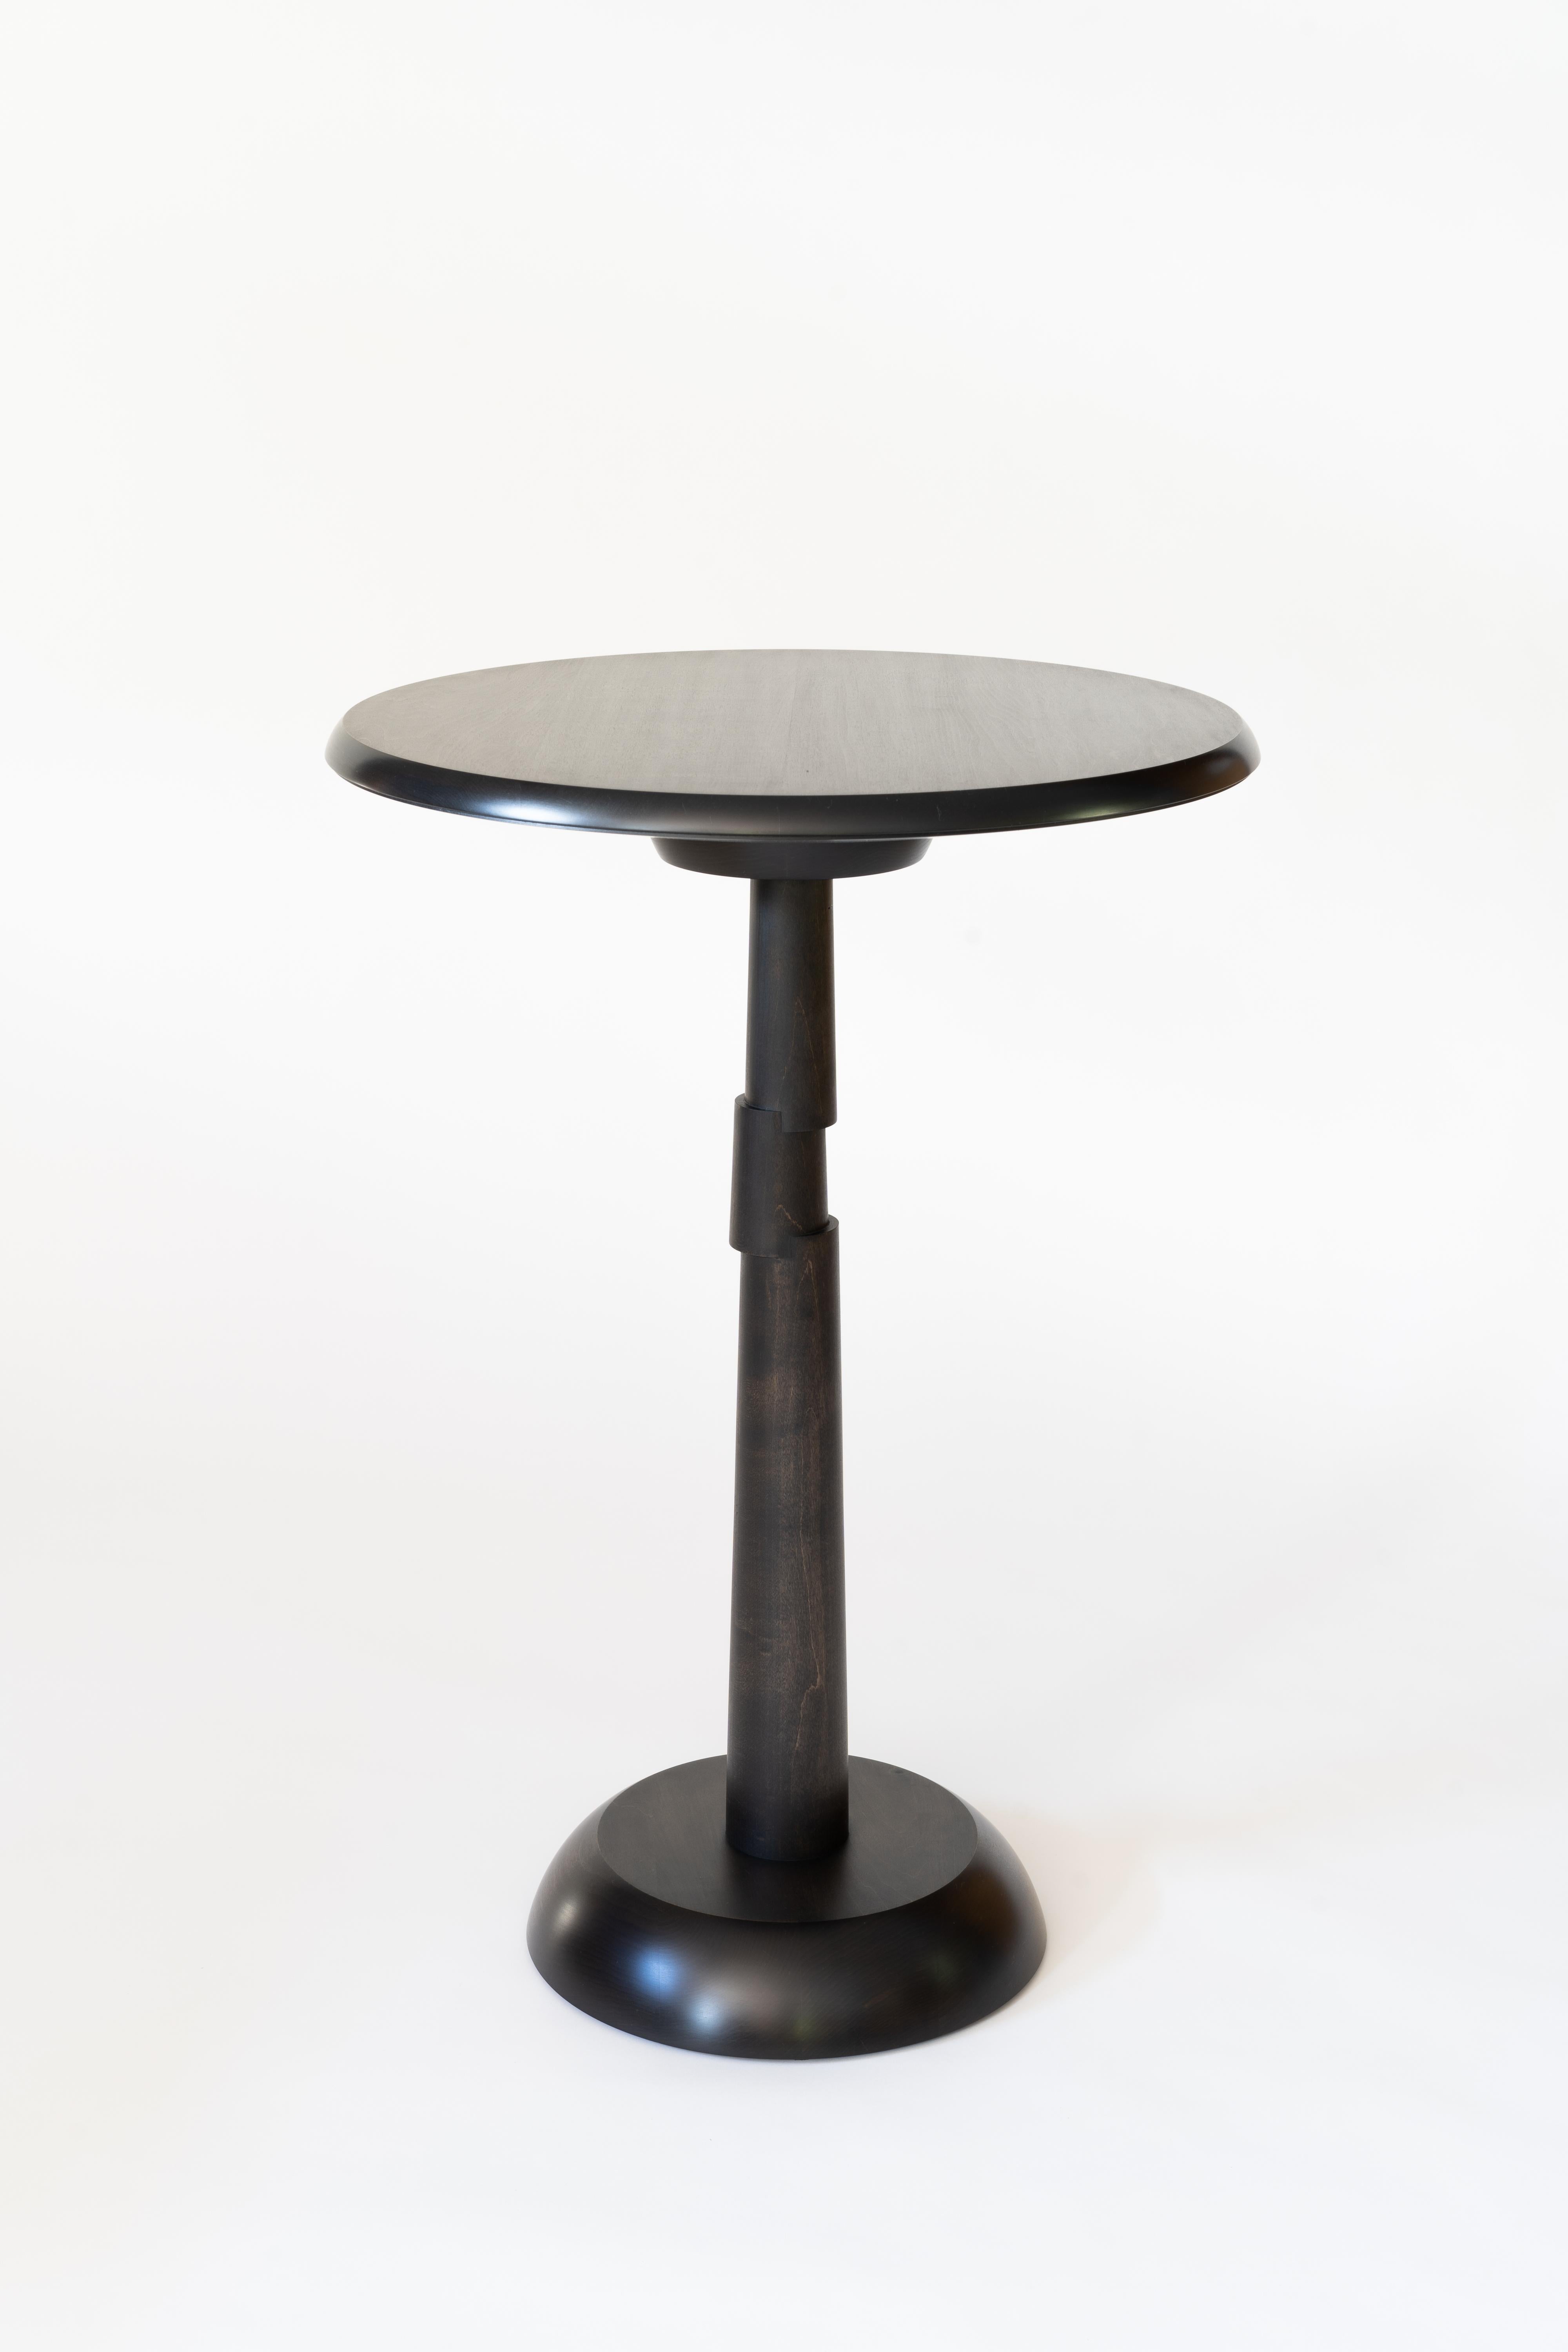 The offset pedestal side table is designed to be both classic and subtly unique, combining function with aesthetics. My intention in this design was to create a piece that referenced the ubiquitous pedestal table, but one that would offer a bit of